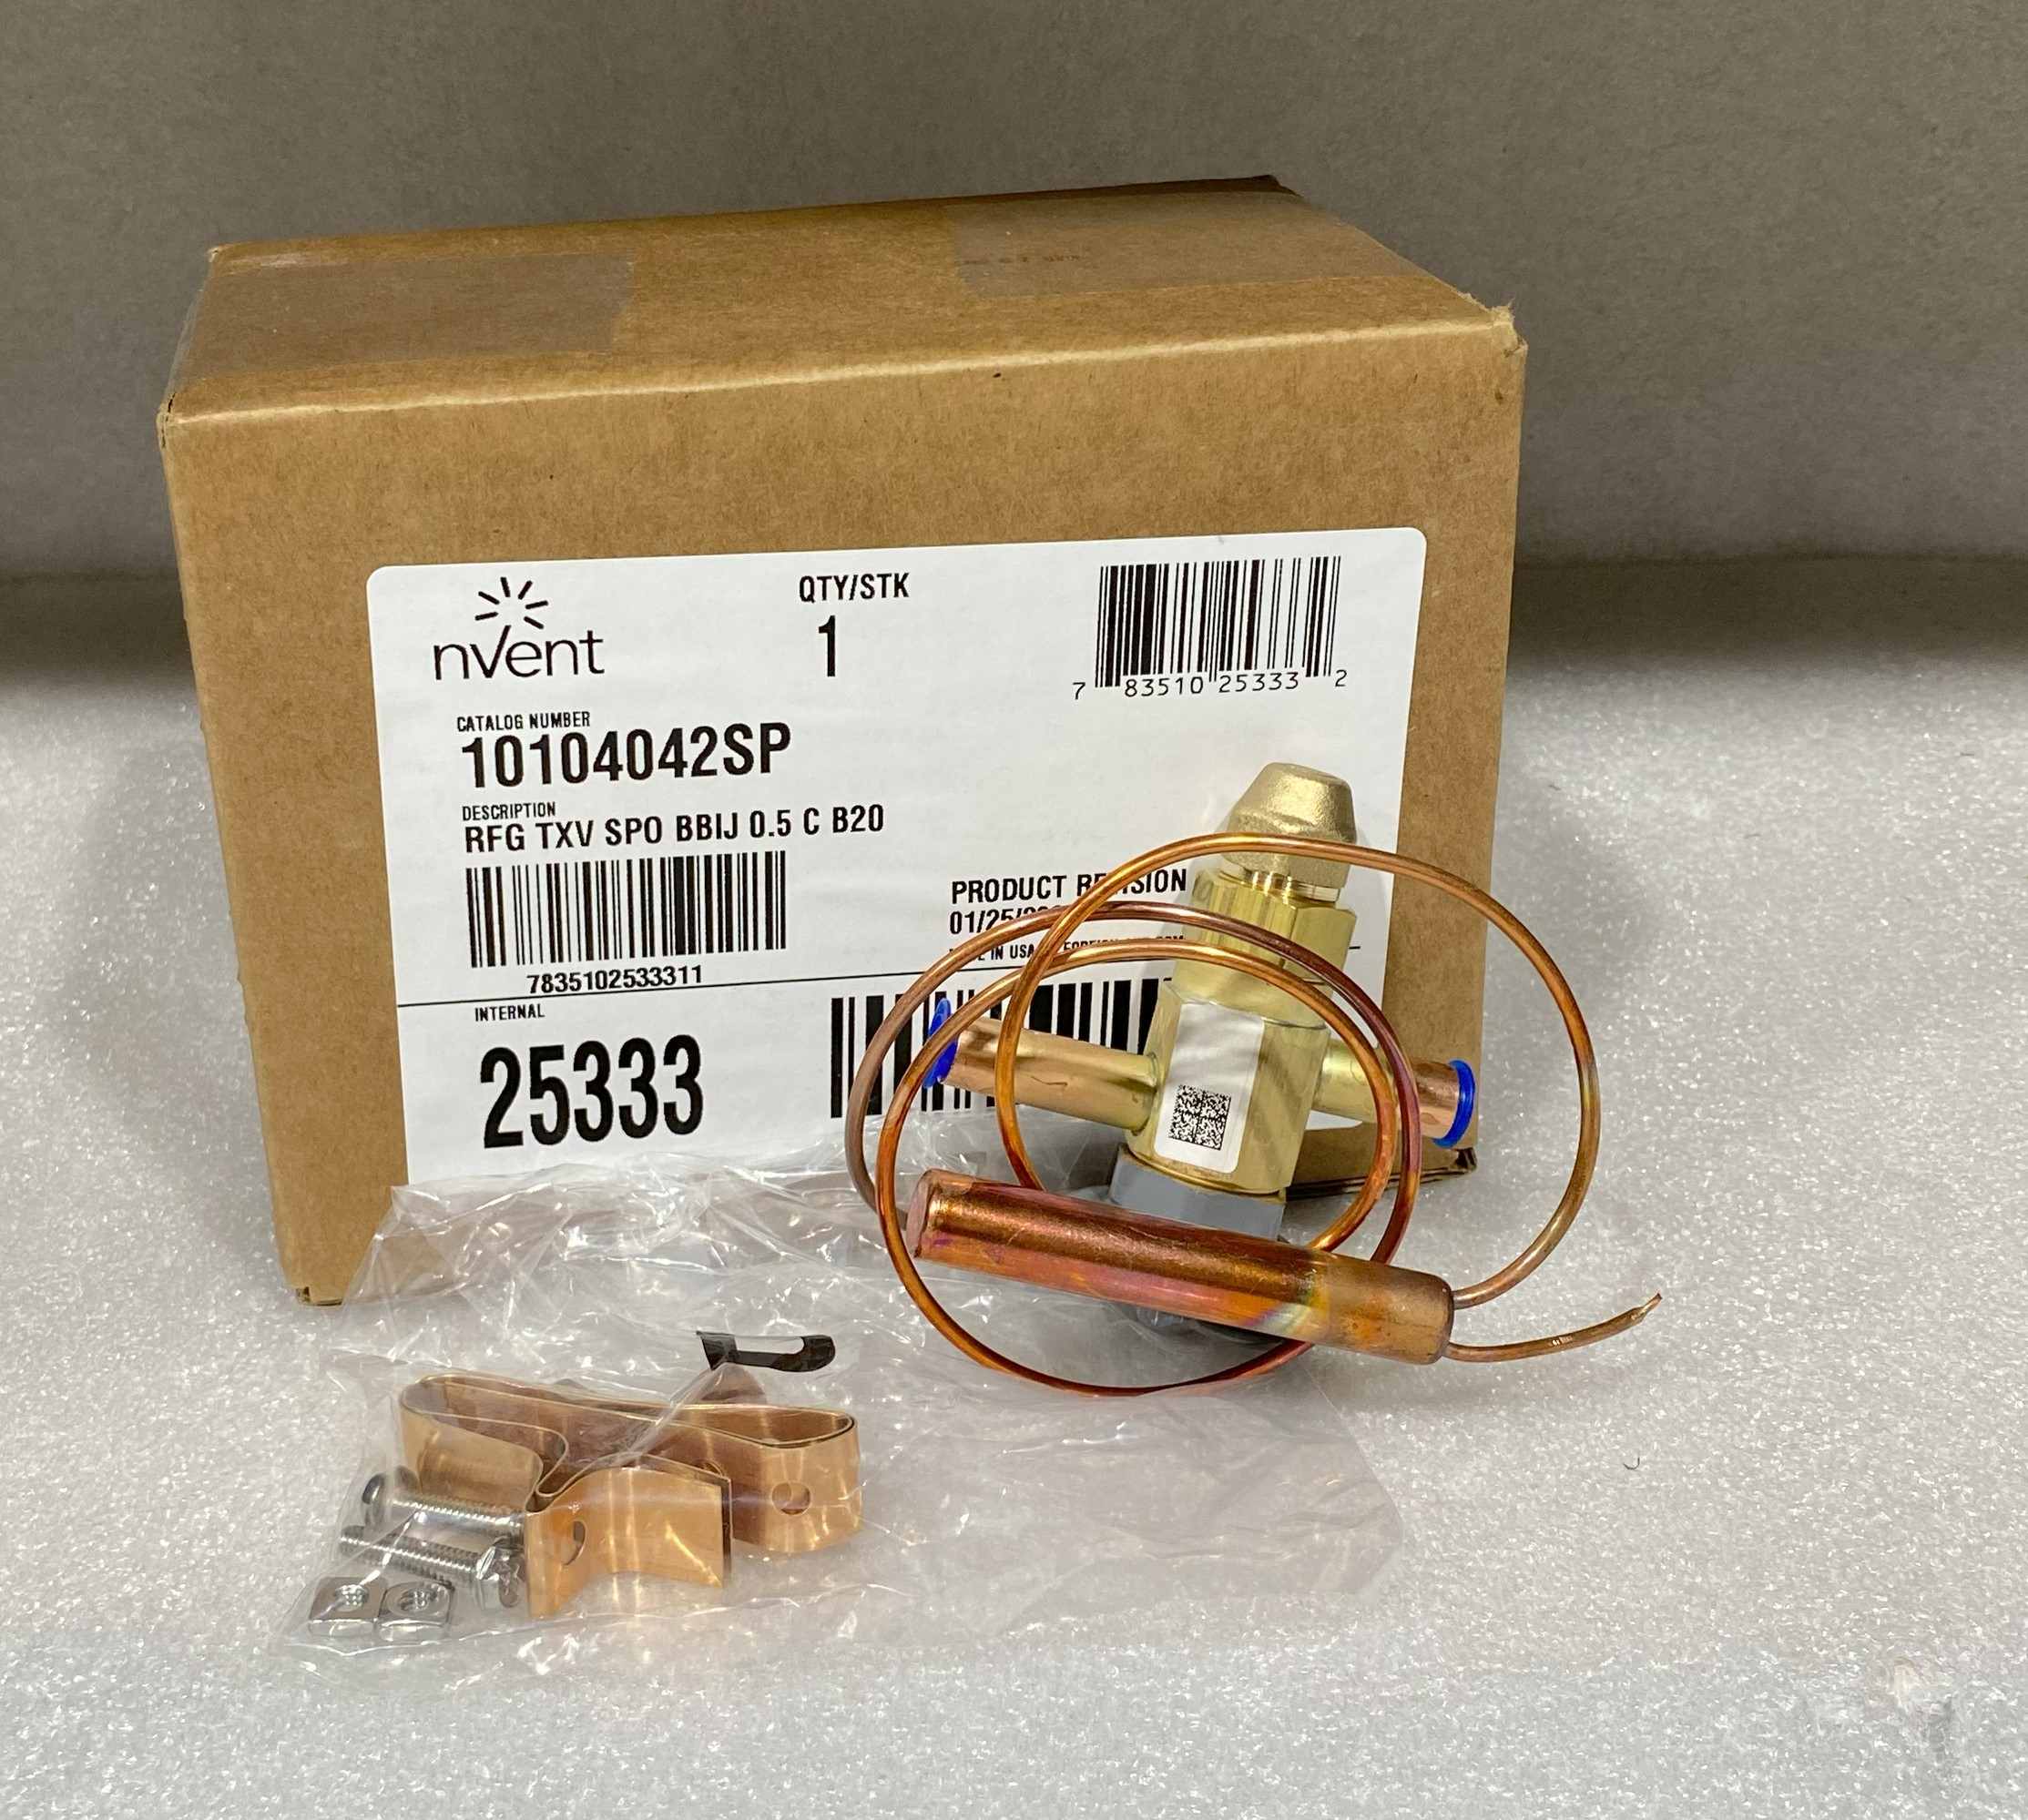 nVent 10104042SP Thermal Expansion Valve - Click Image to Close